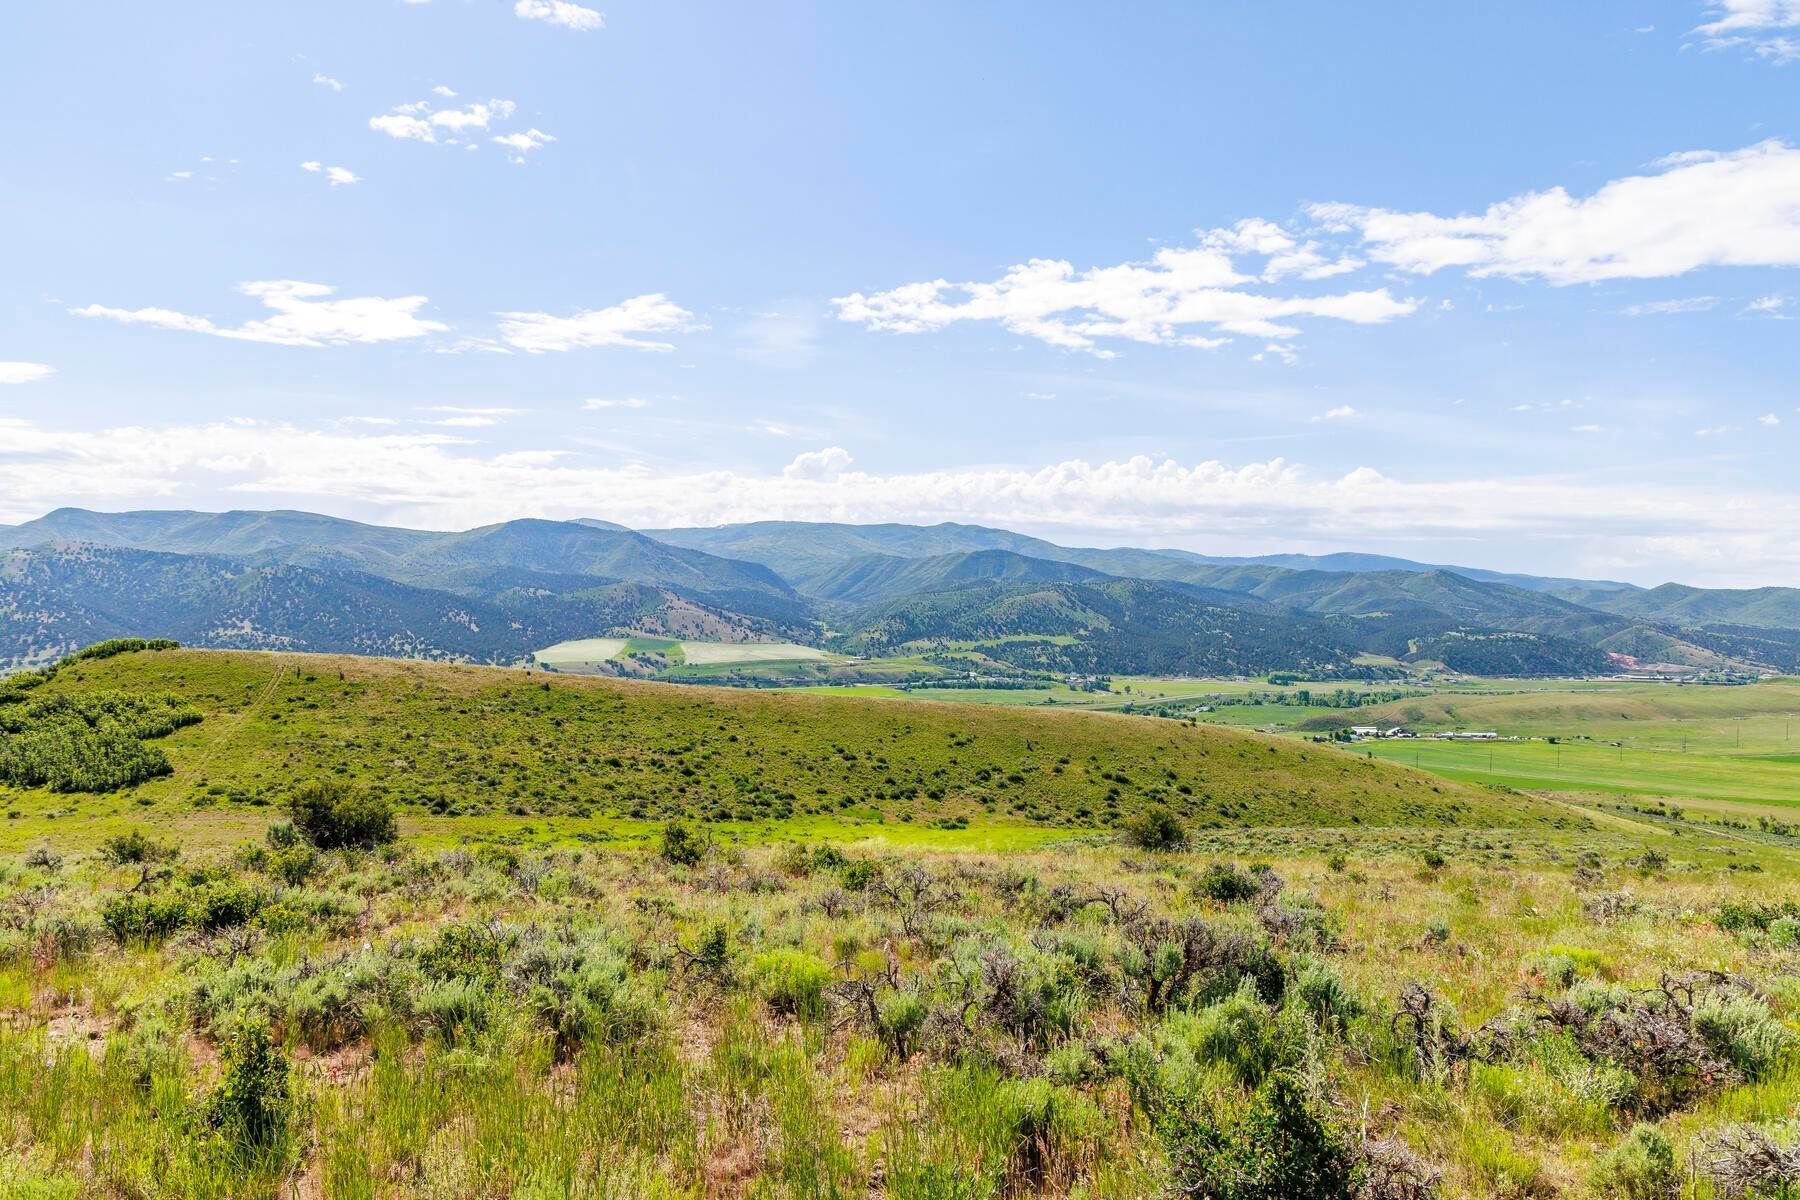 48. Farm and Ranch Properties for Sale at 261 Acres on the Weber River only 15 minutes from Park City 1255 S West Hoytsville Rd Hoytsville, Utah 84017 United States